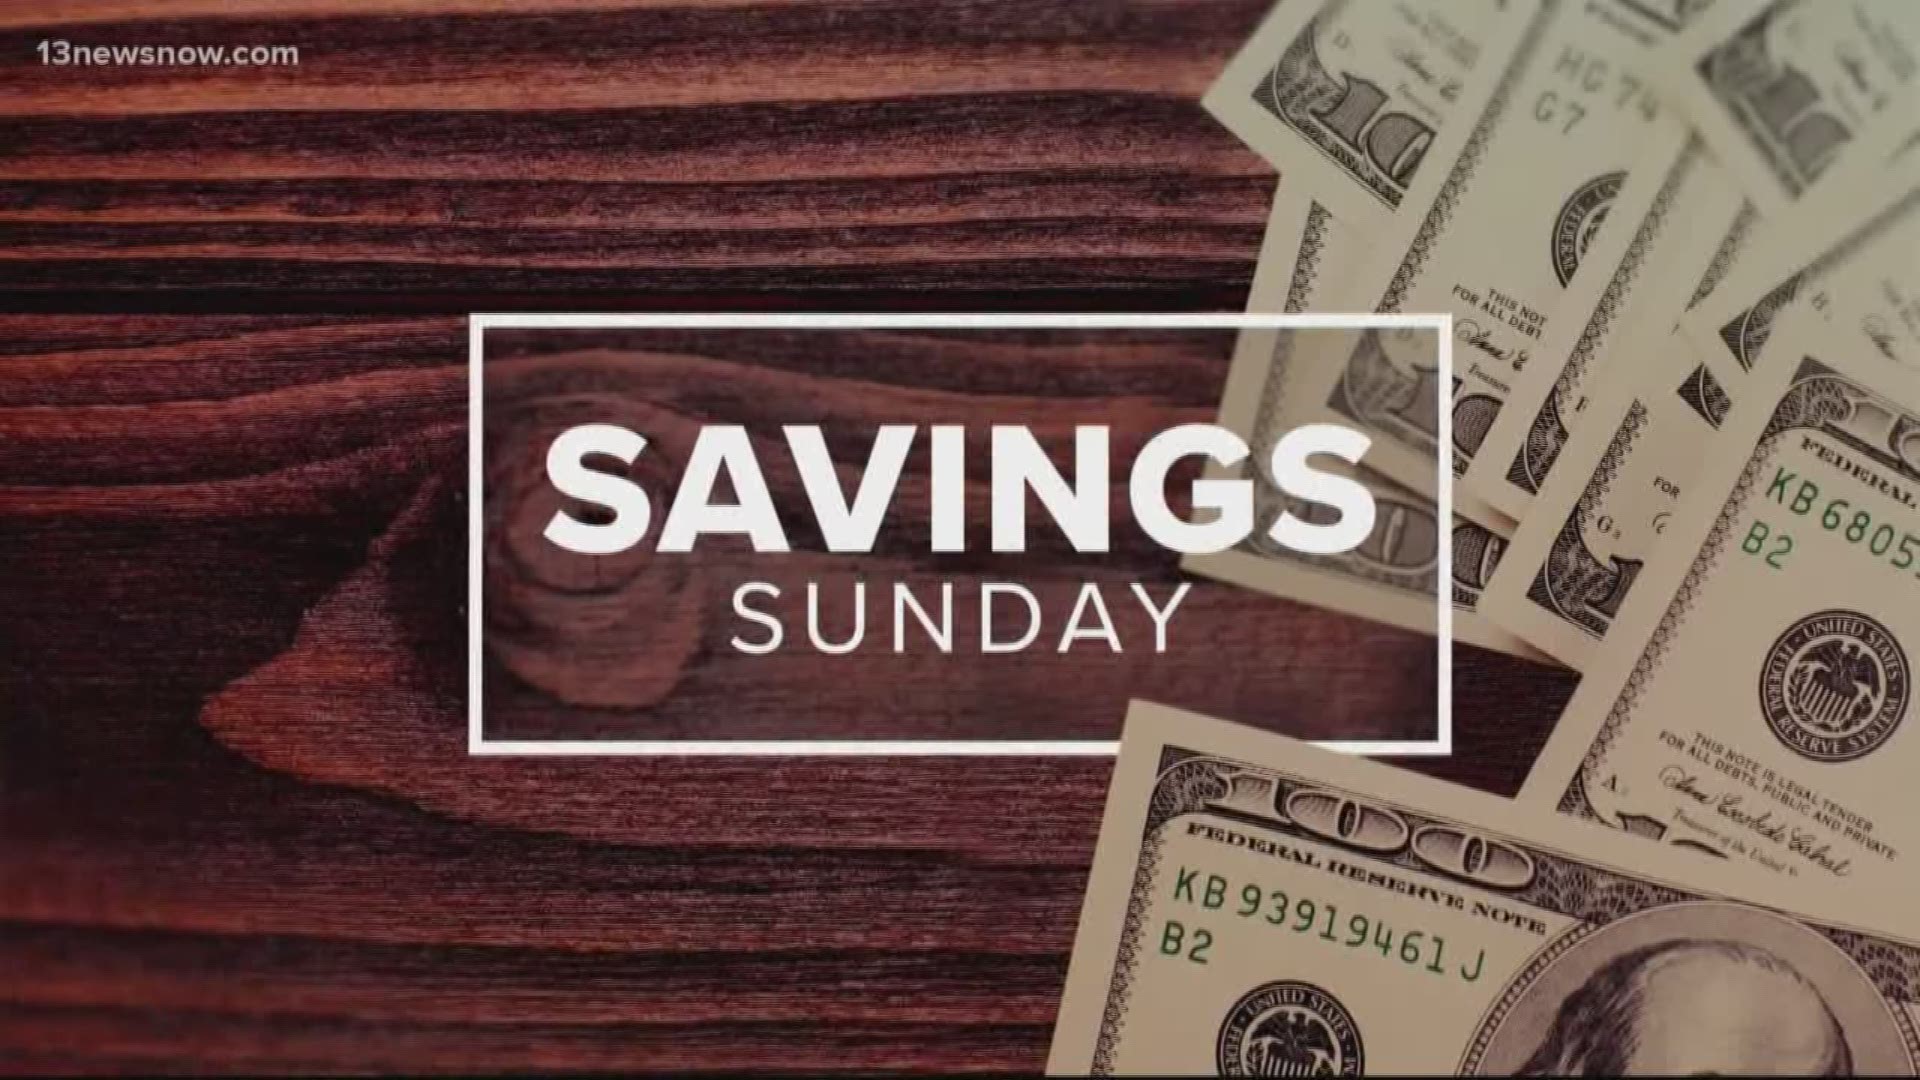 Laura Oliver from www.afrugalchick.com has your big savings for the week of March 1, 2020.